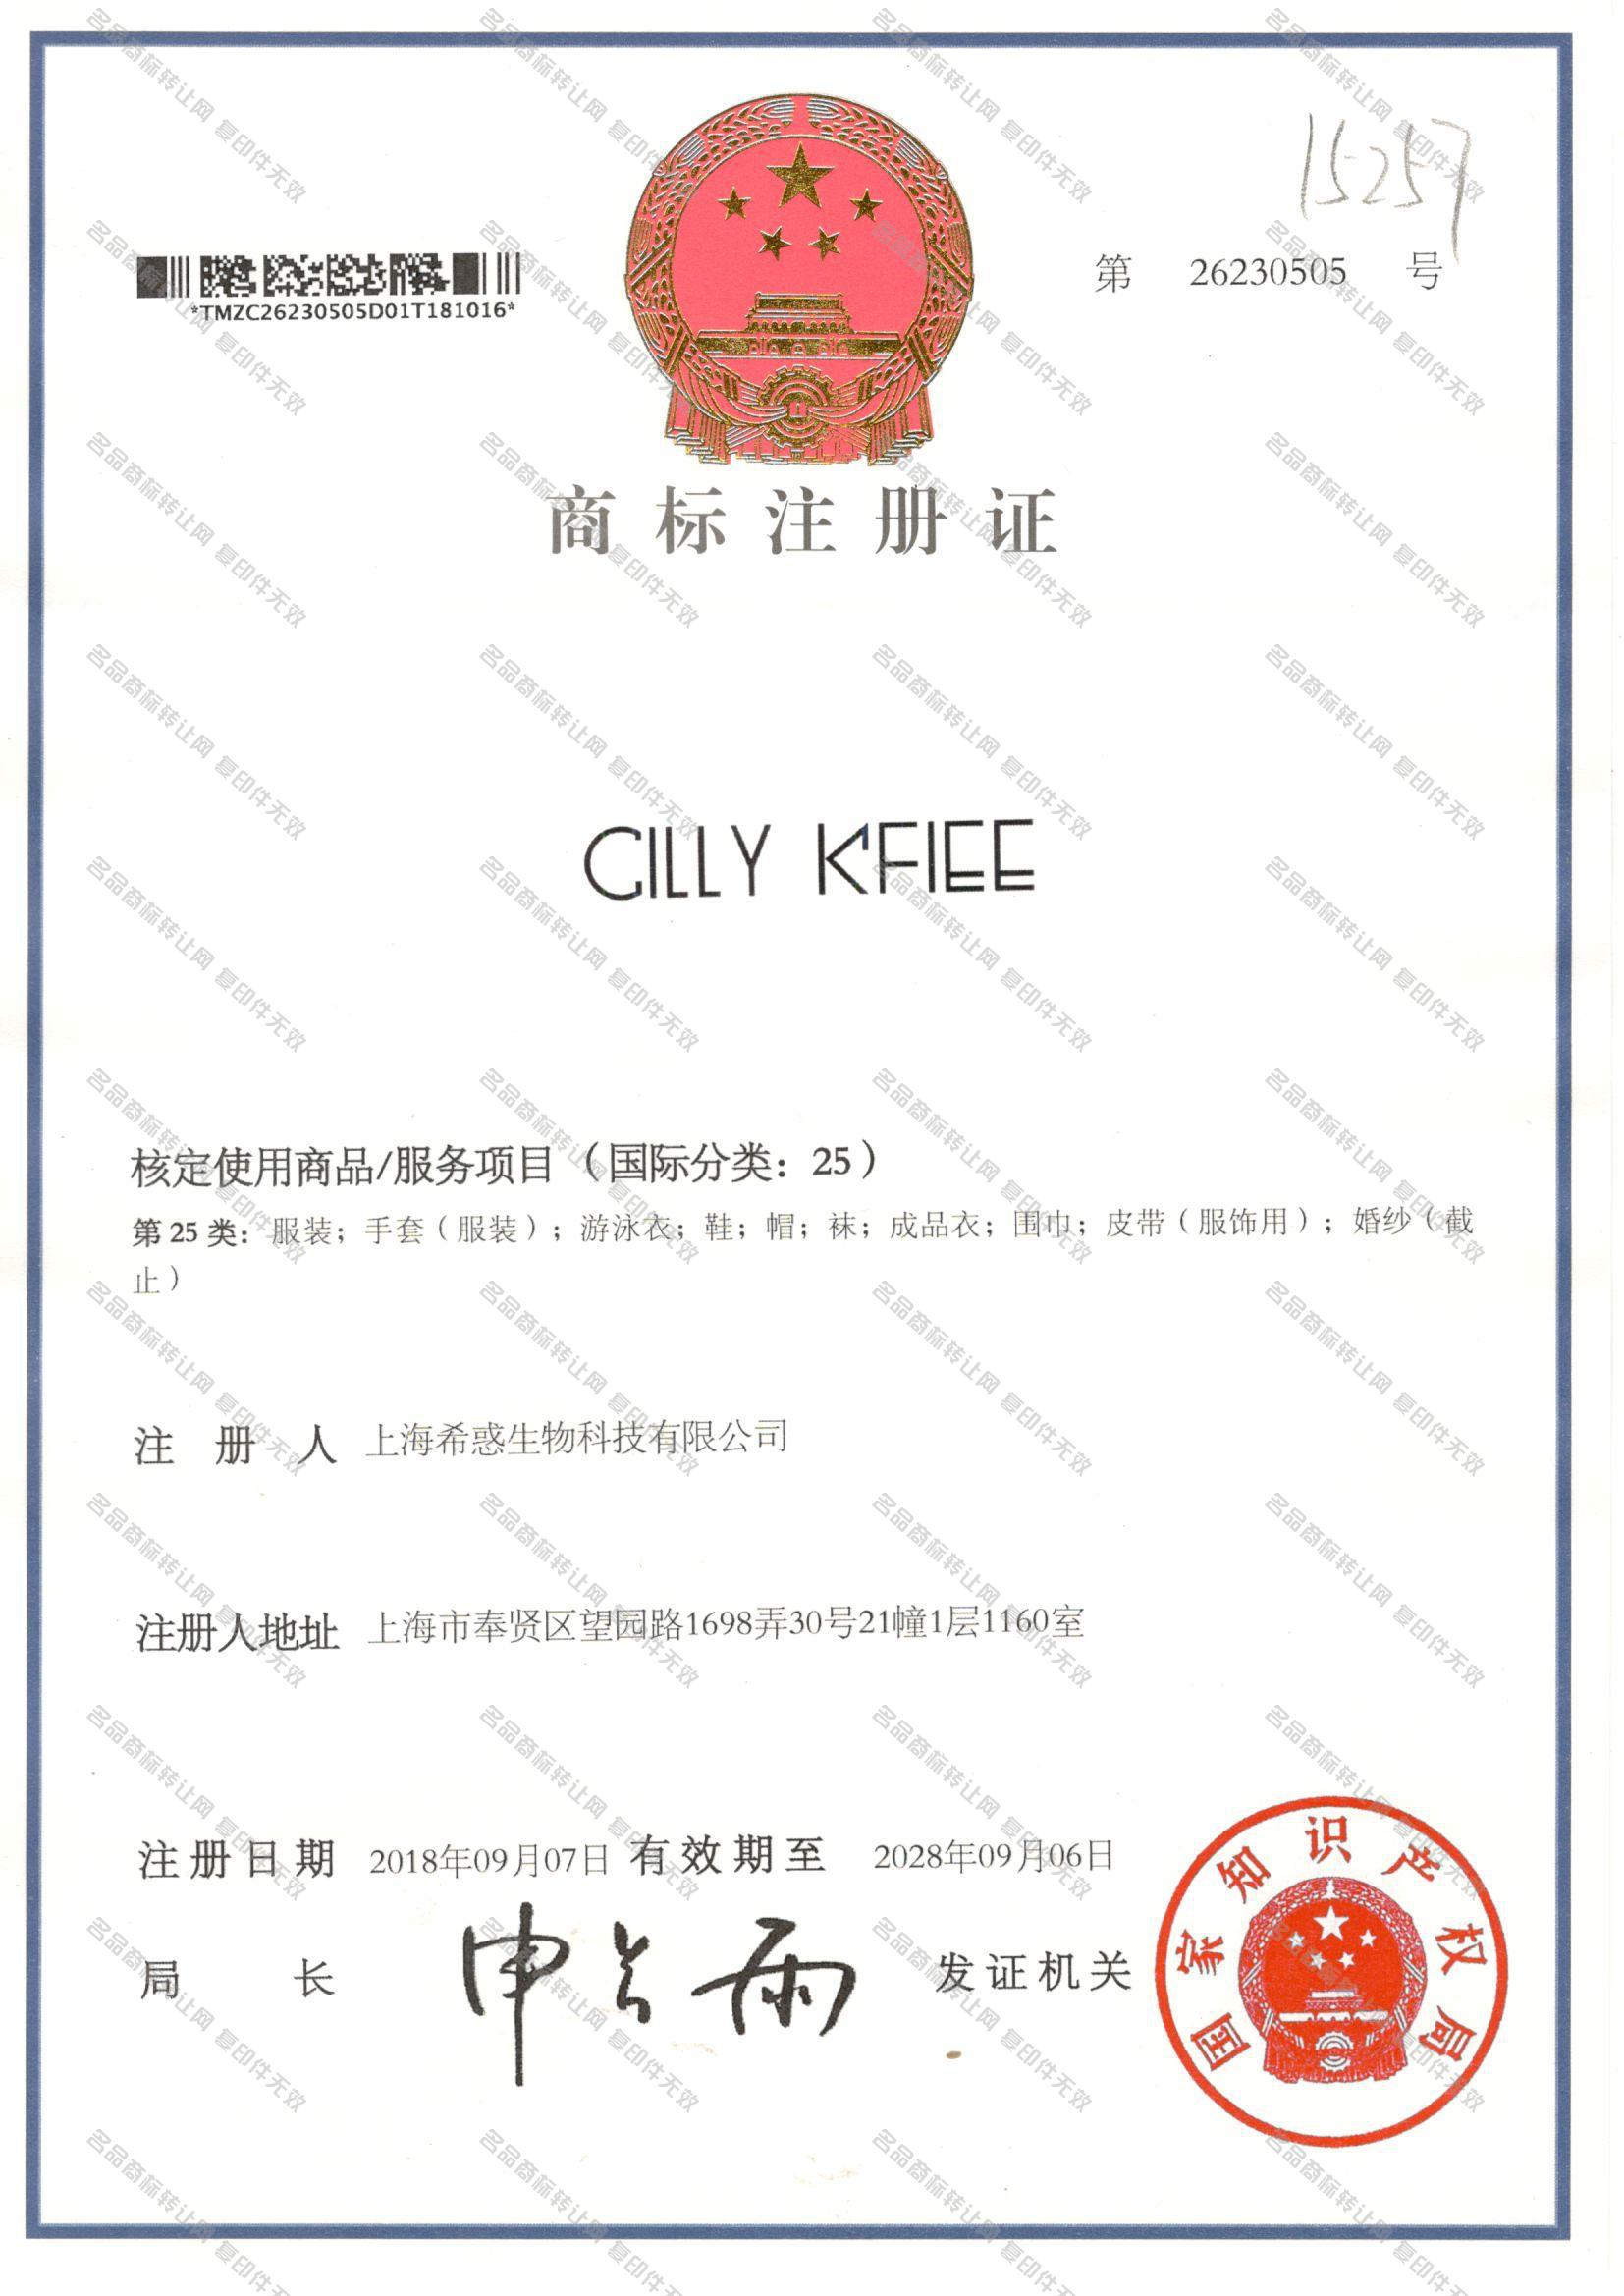 CILLY KFIEE注册证